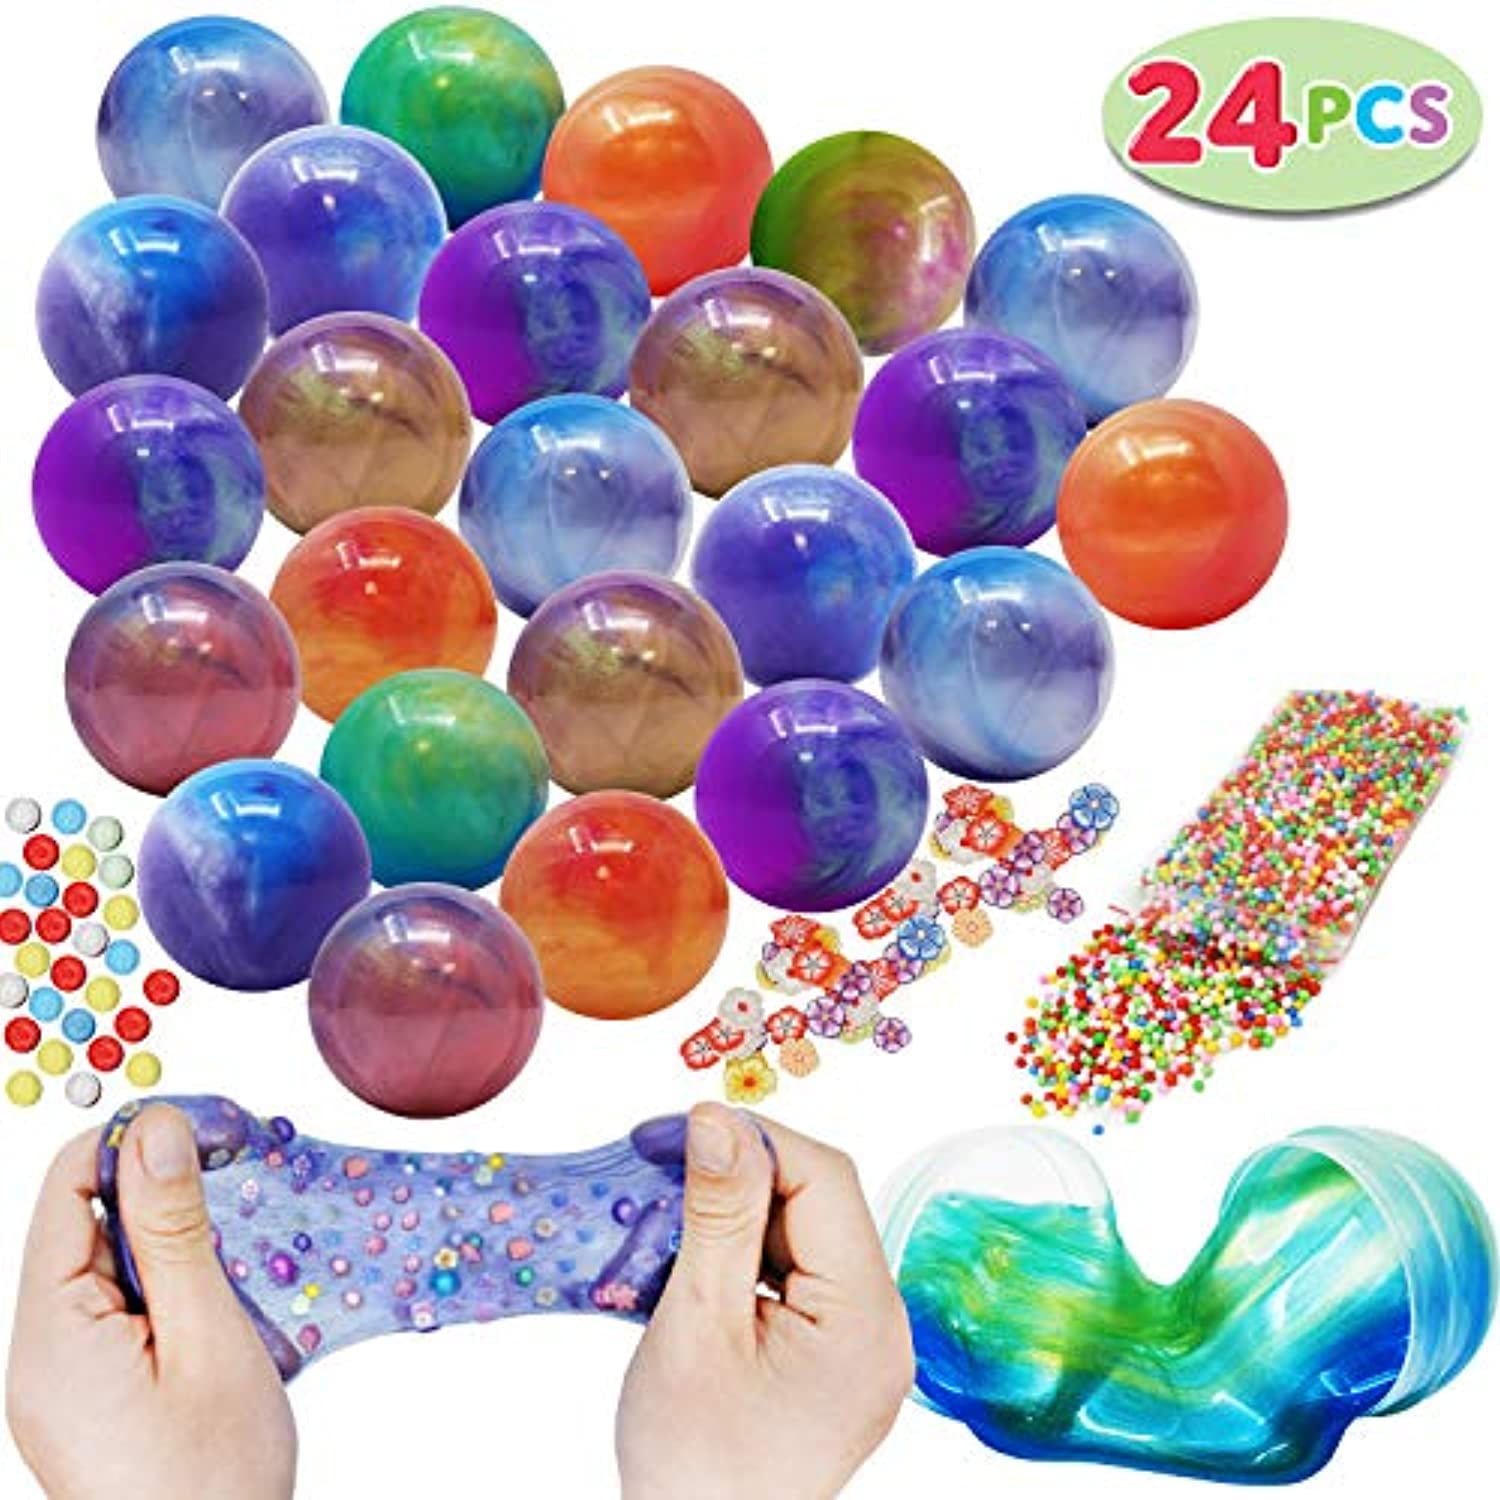 24 Packs Silly Slime Fluffy Putty with Pearls and Fruit Accessories Stress Relief Prefilled in Easter Eggs For Valentines Day Party Favors Carnivals School Supplies and Gift Exchange Easter Basket Stuffers